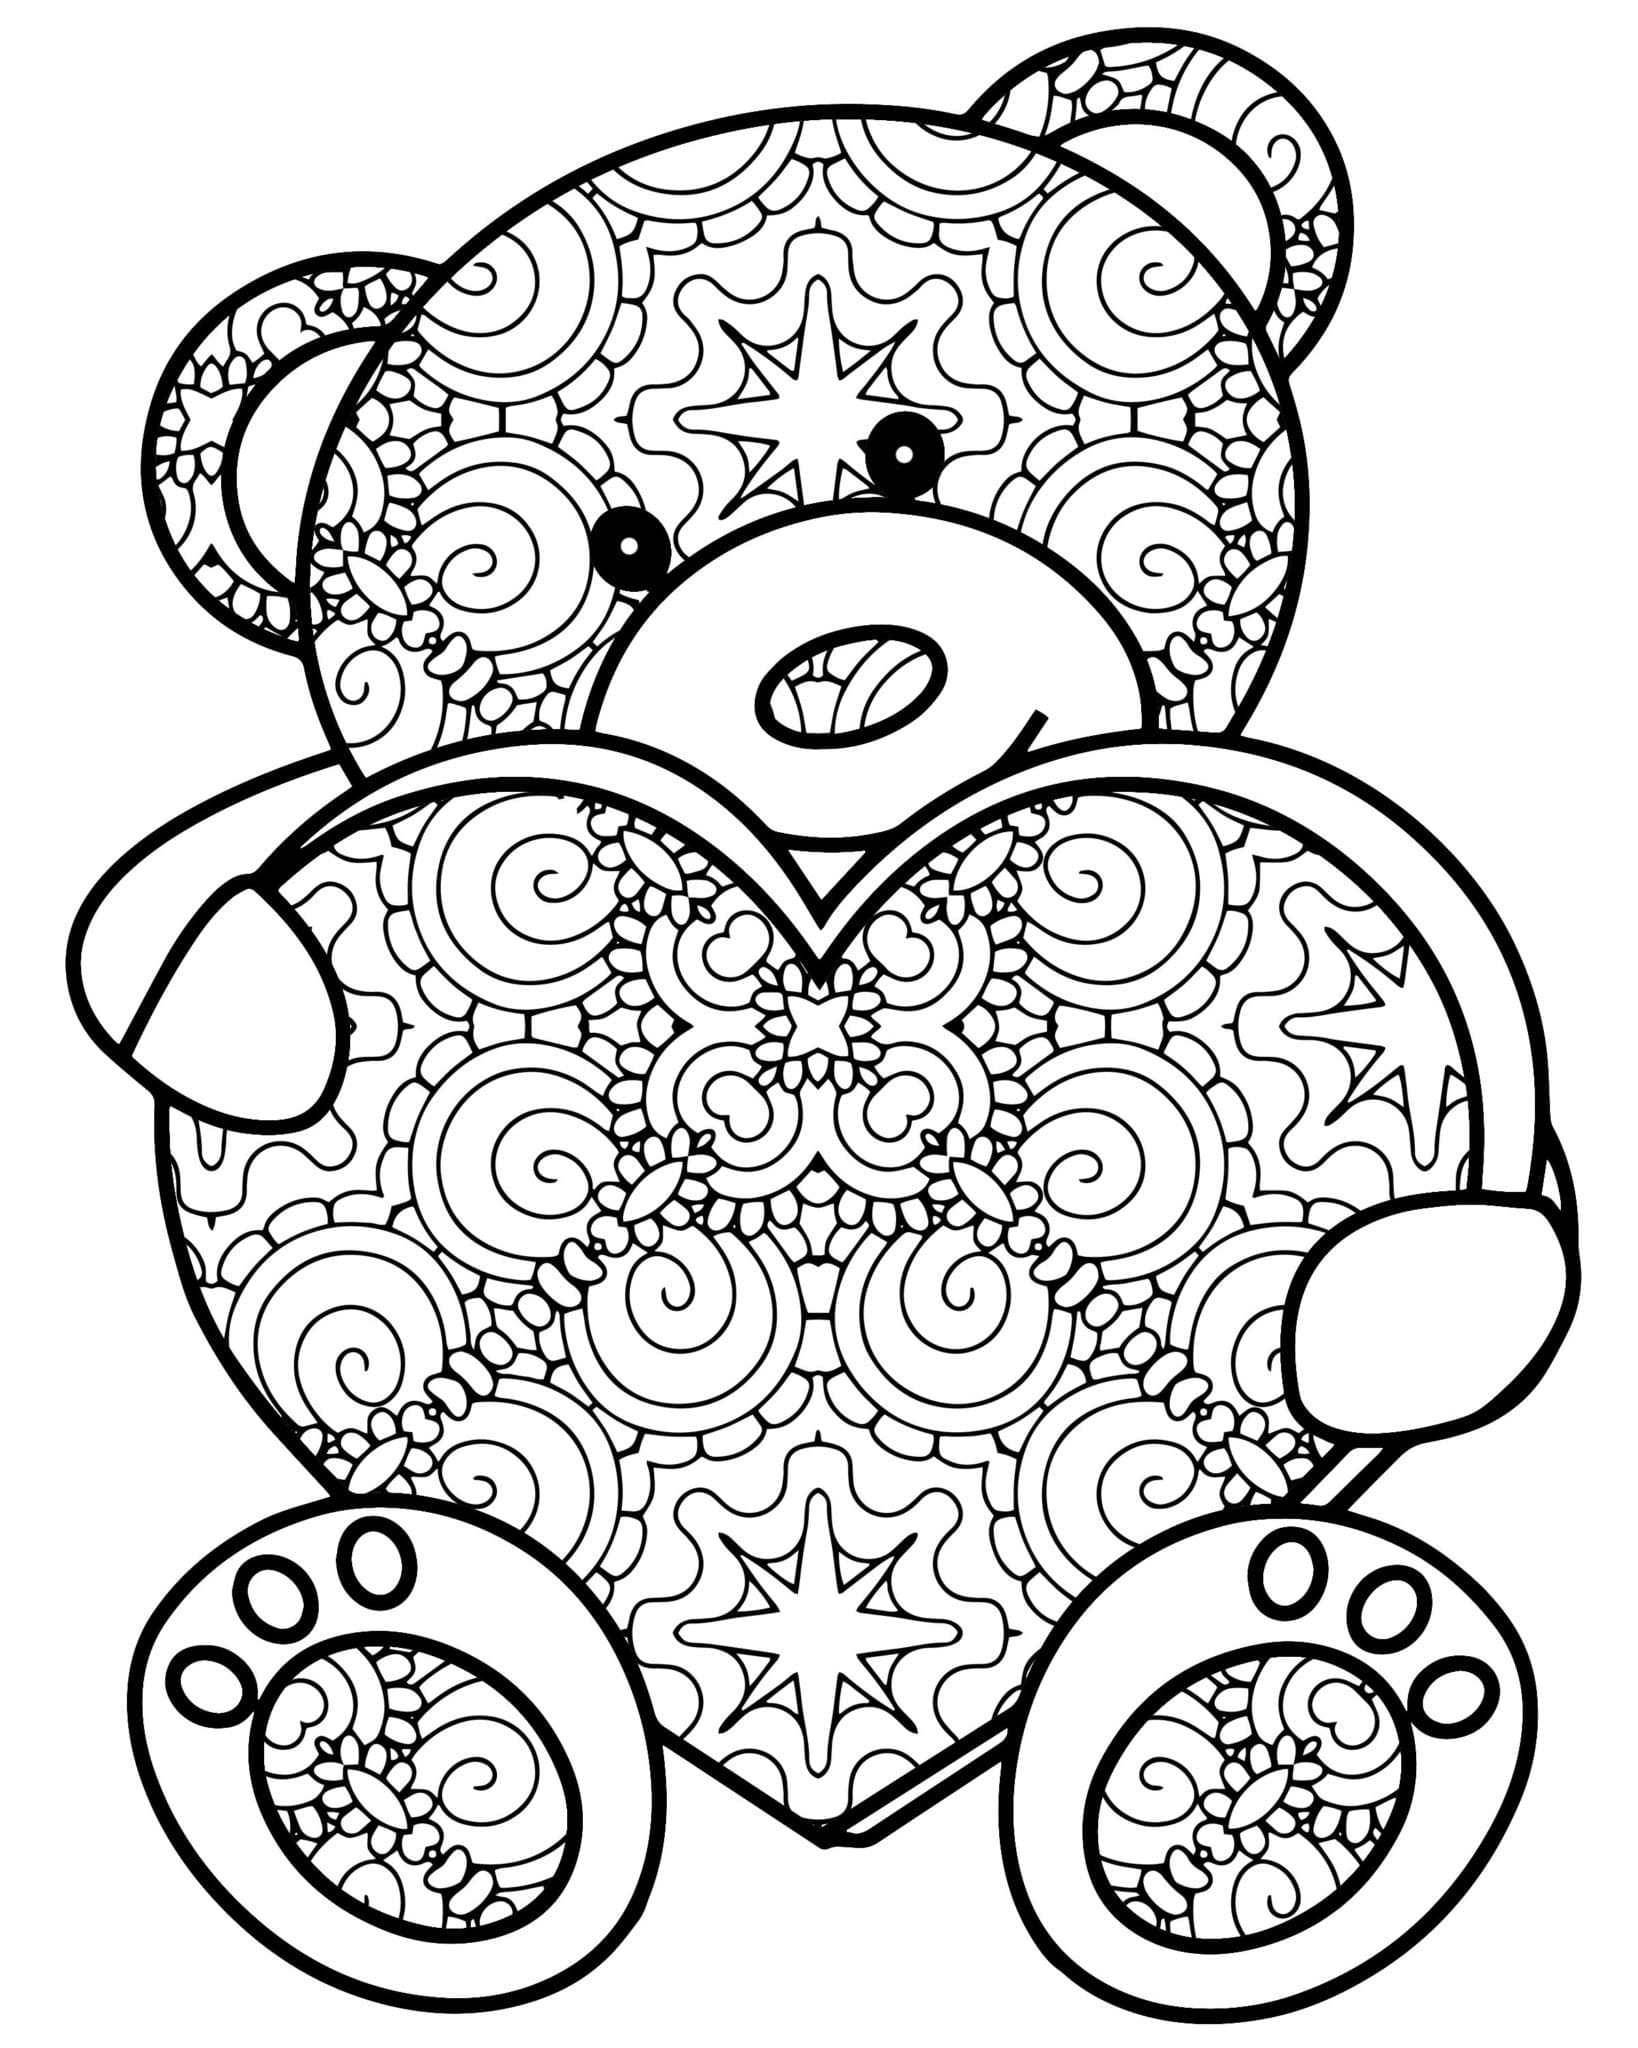 Coloring page Teddy Bears Teddy bear for adults